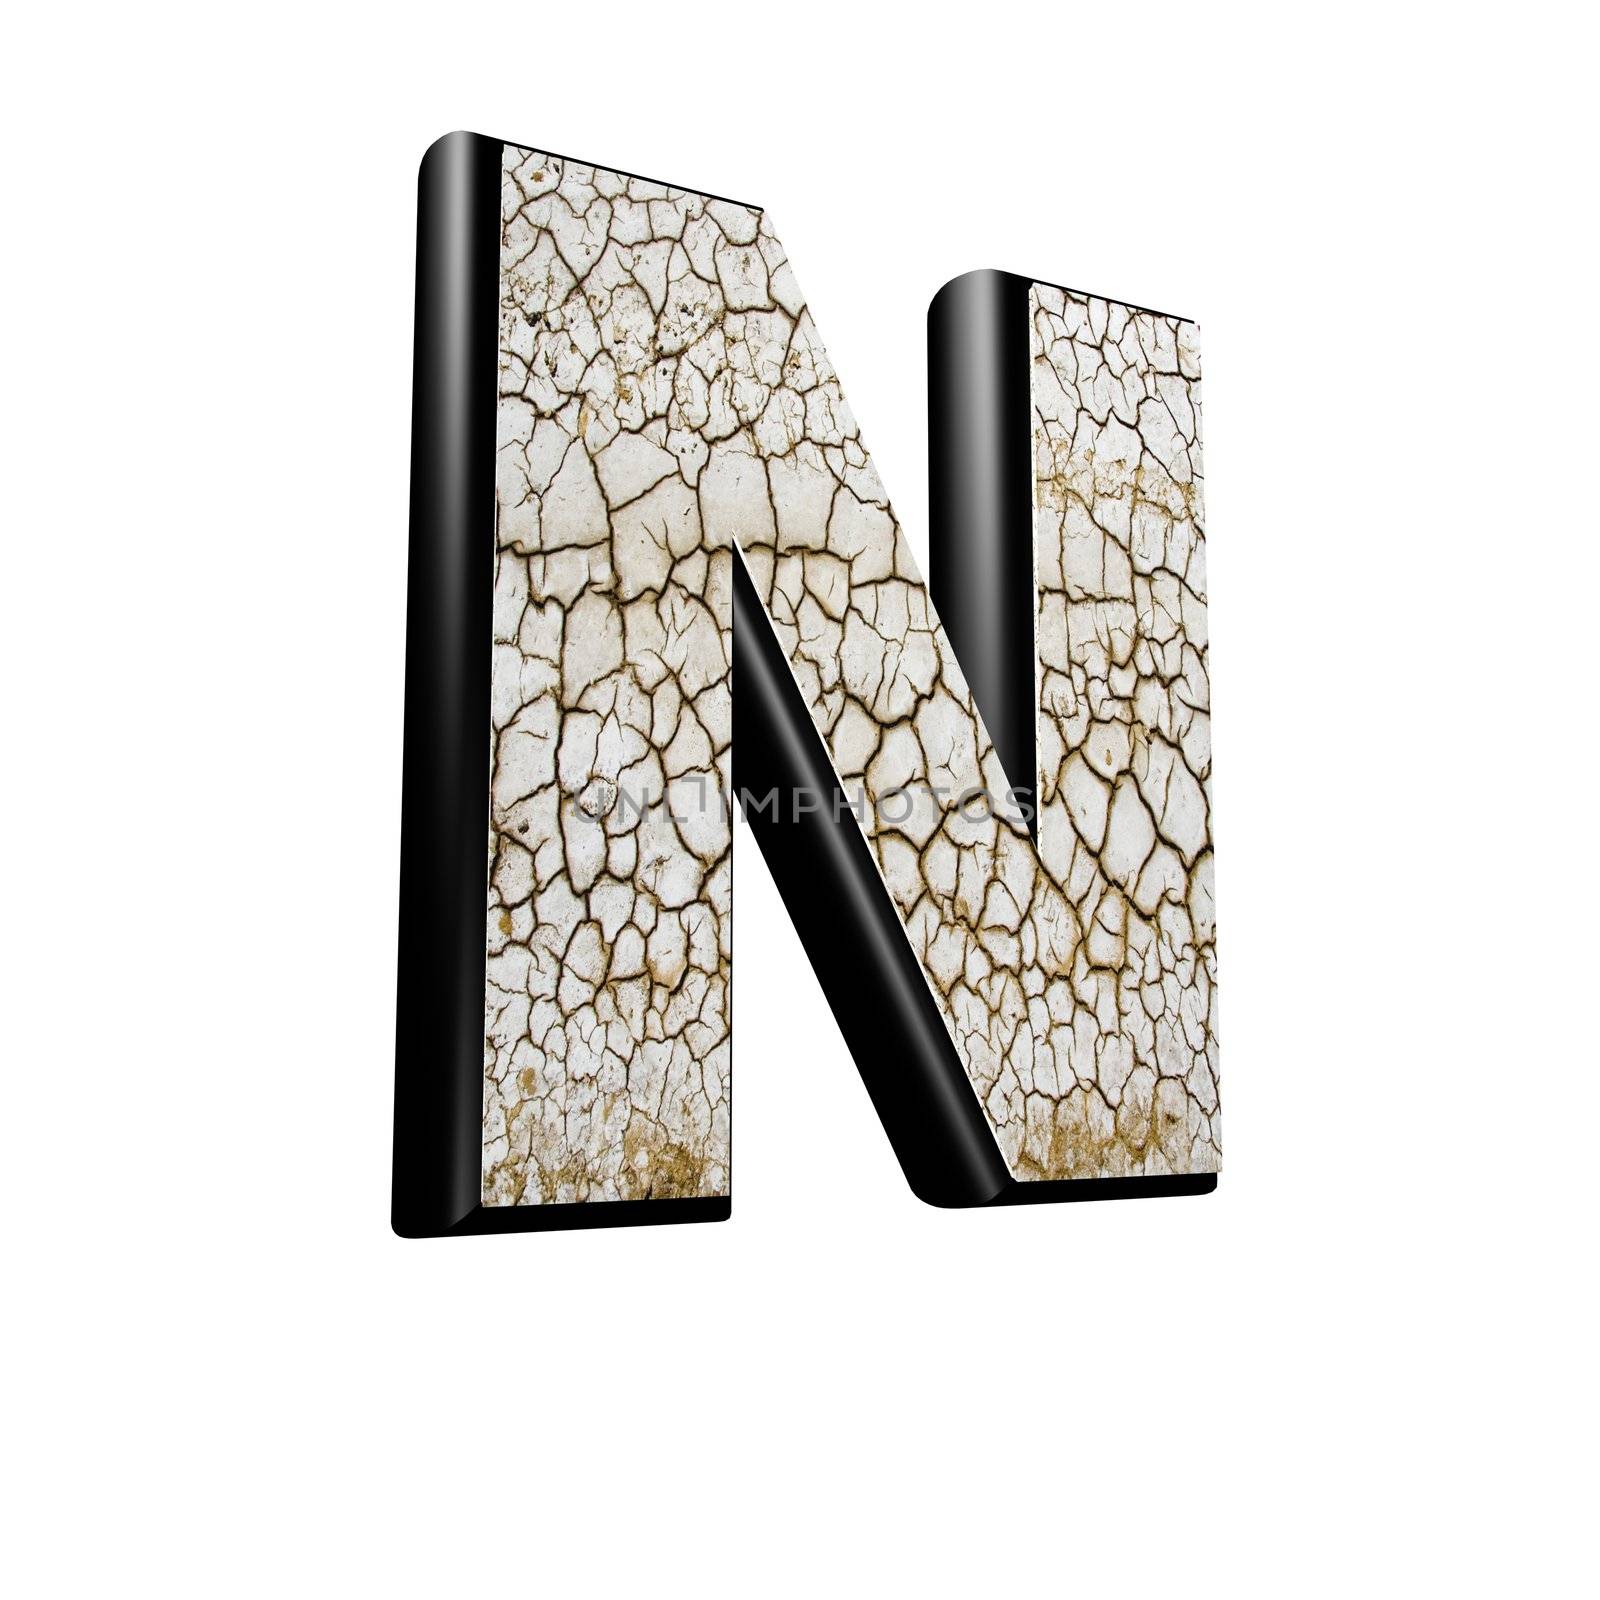 abstract 3d letter with dry ground texture - N by chrisroll